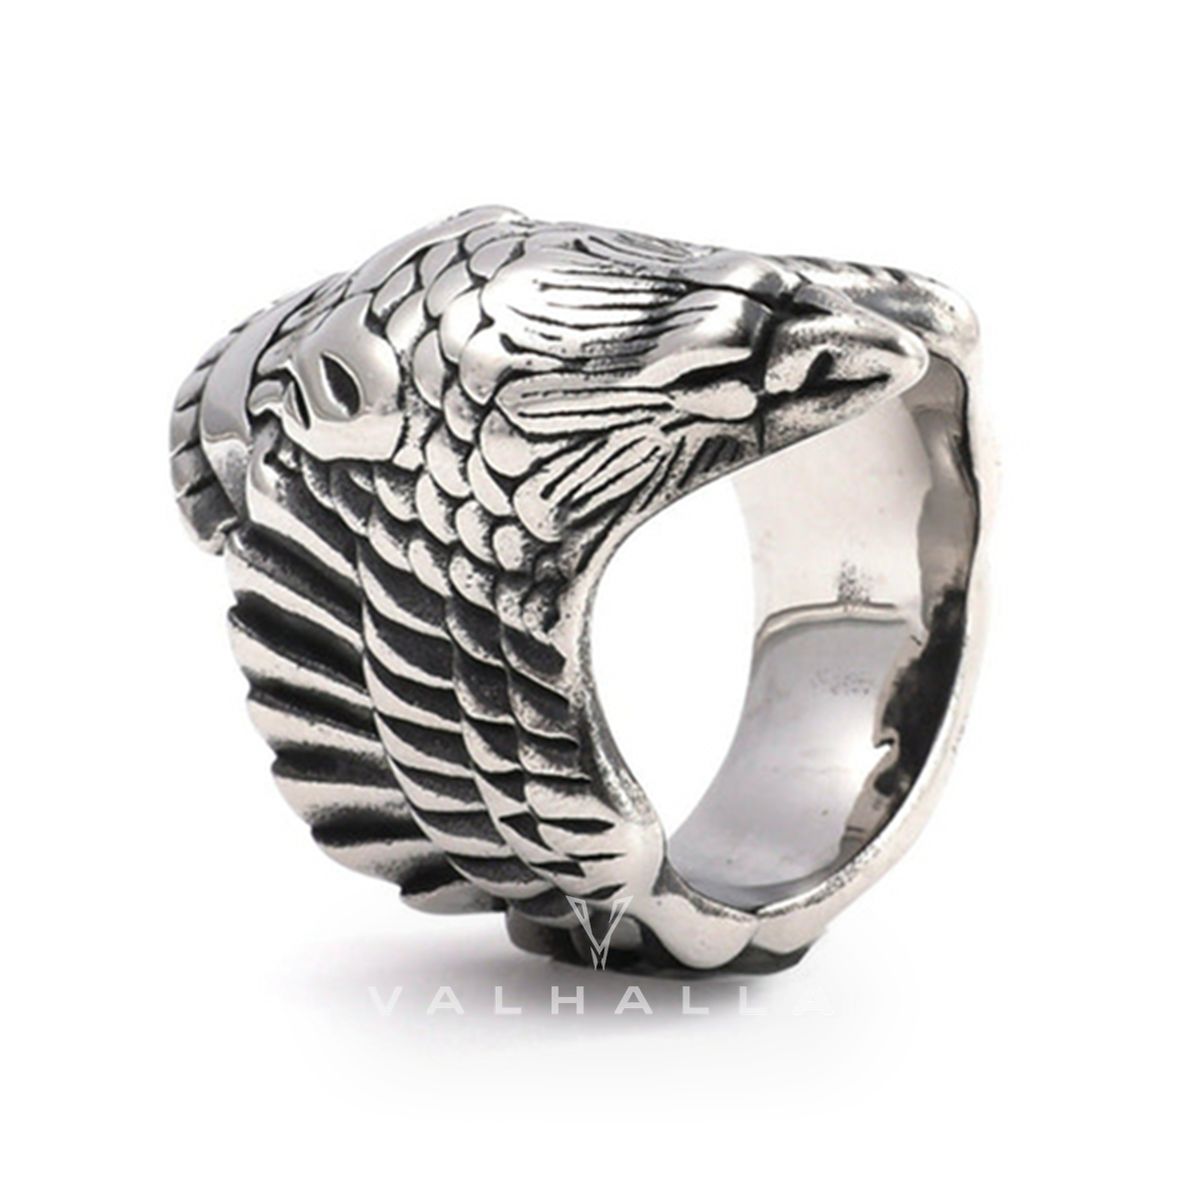 Crow Stainless Steel Beast Ring